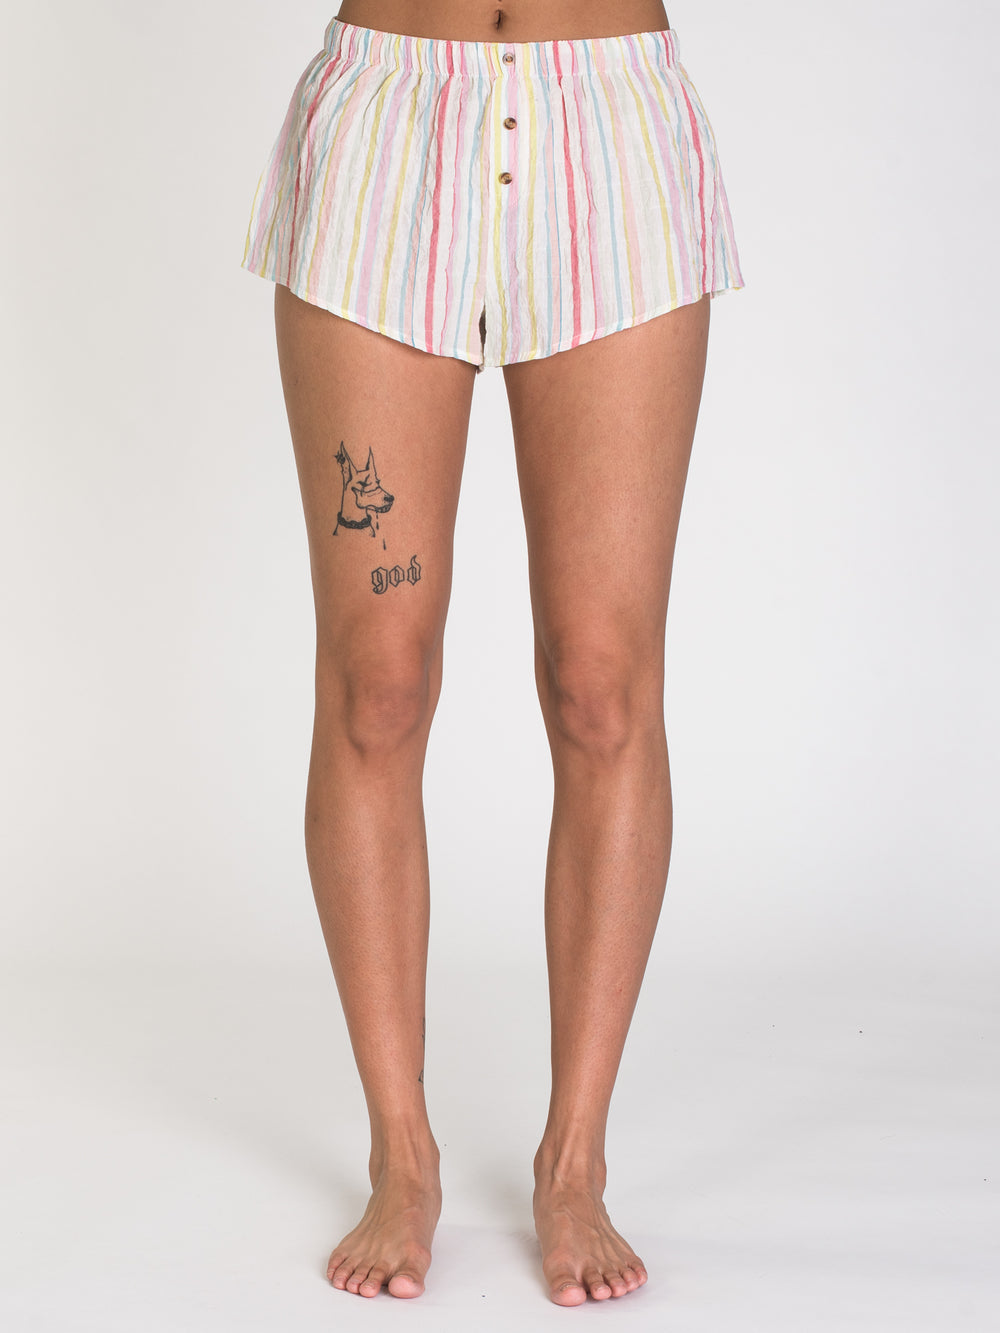 HARLOW PENELOPE BOXER SHORT - CLEARANCE